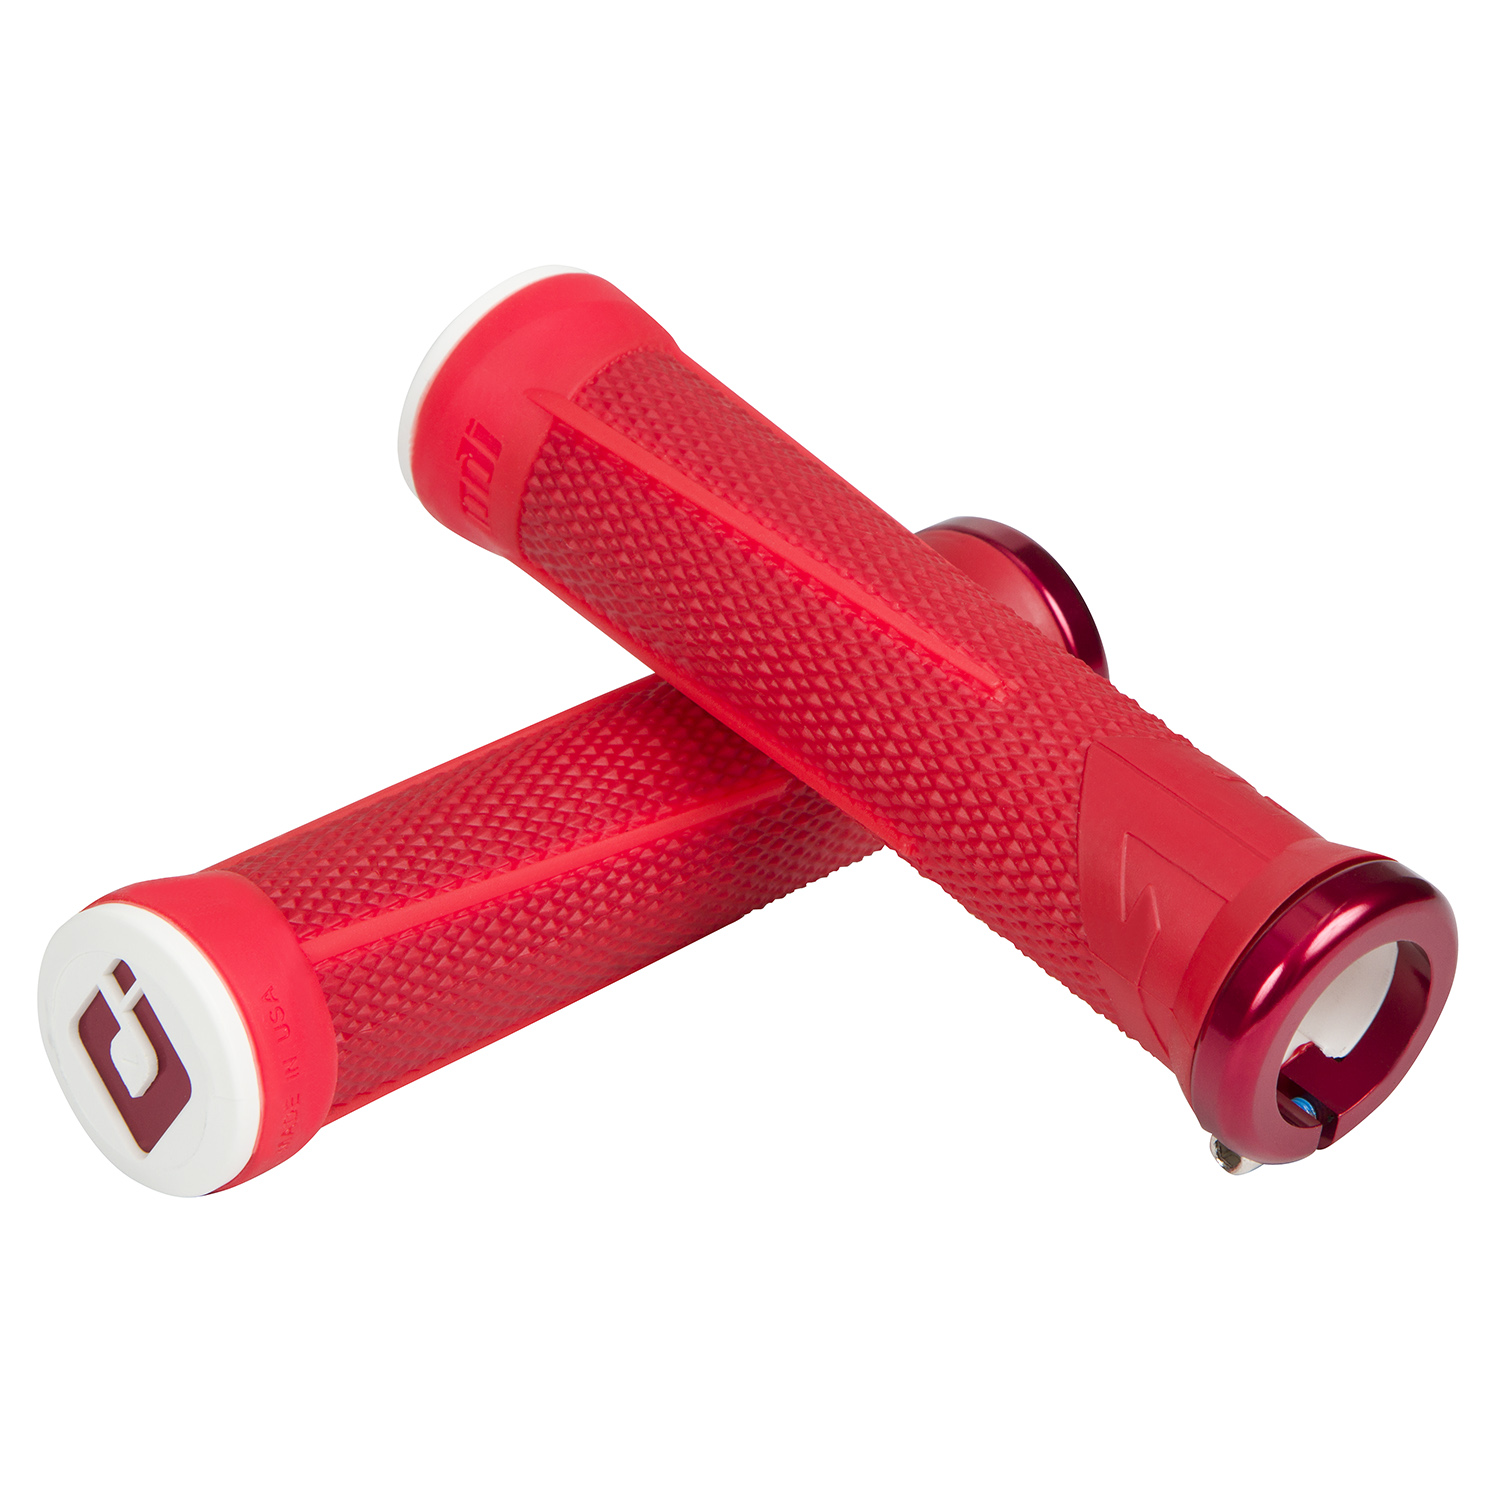 ODI MTB Grips AG-1 Lock-On Red/Fire Red, 135 mm